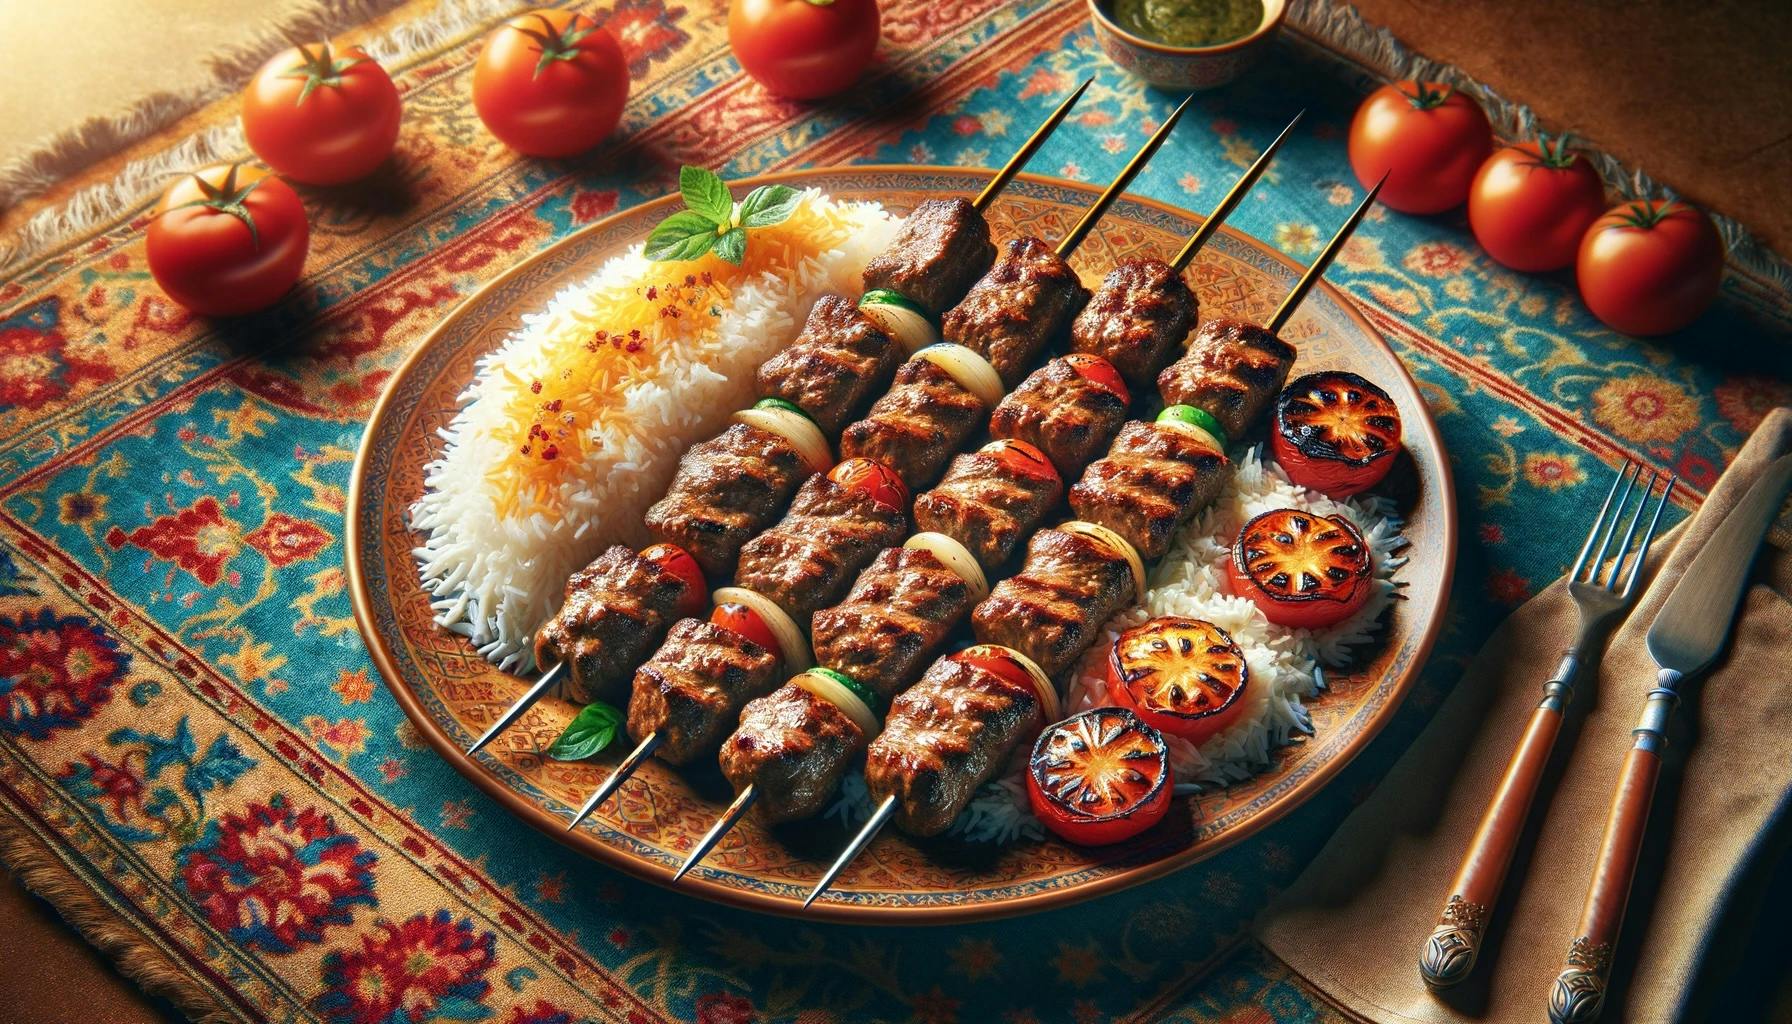 Kabob Koobideh is a popular Persian kebab made with ground lamb or beef and seasoned with onions, garlic, and spices, served with flatbreads.